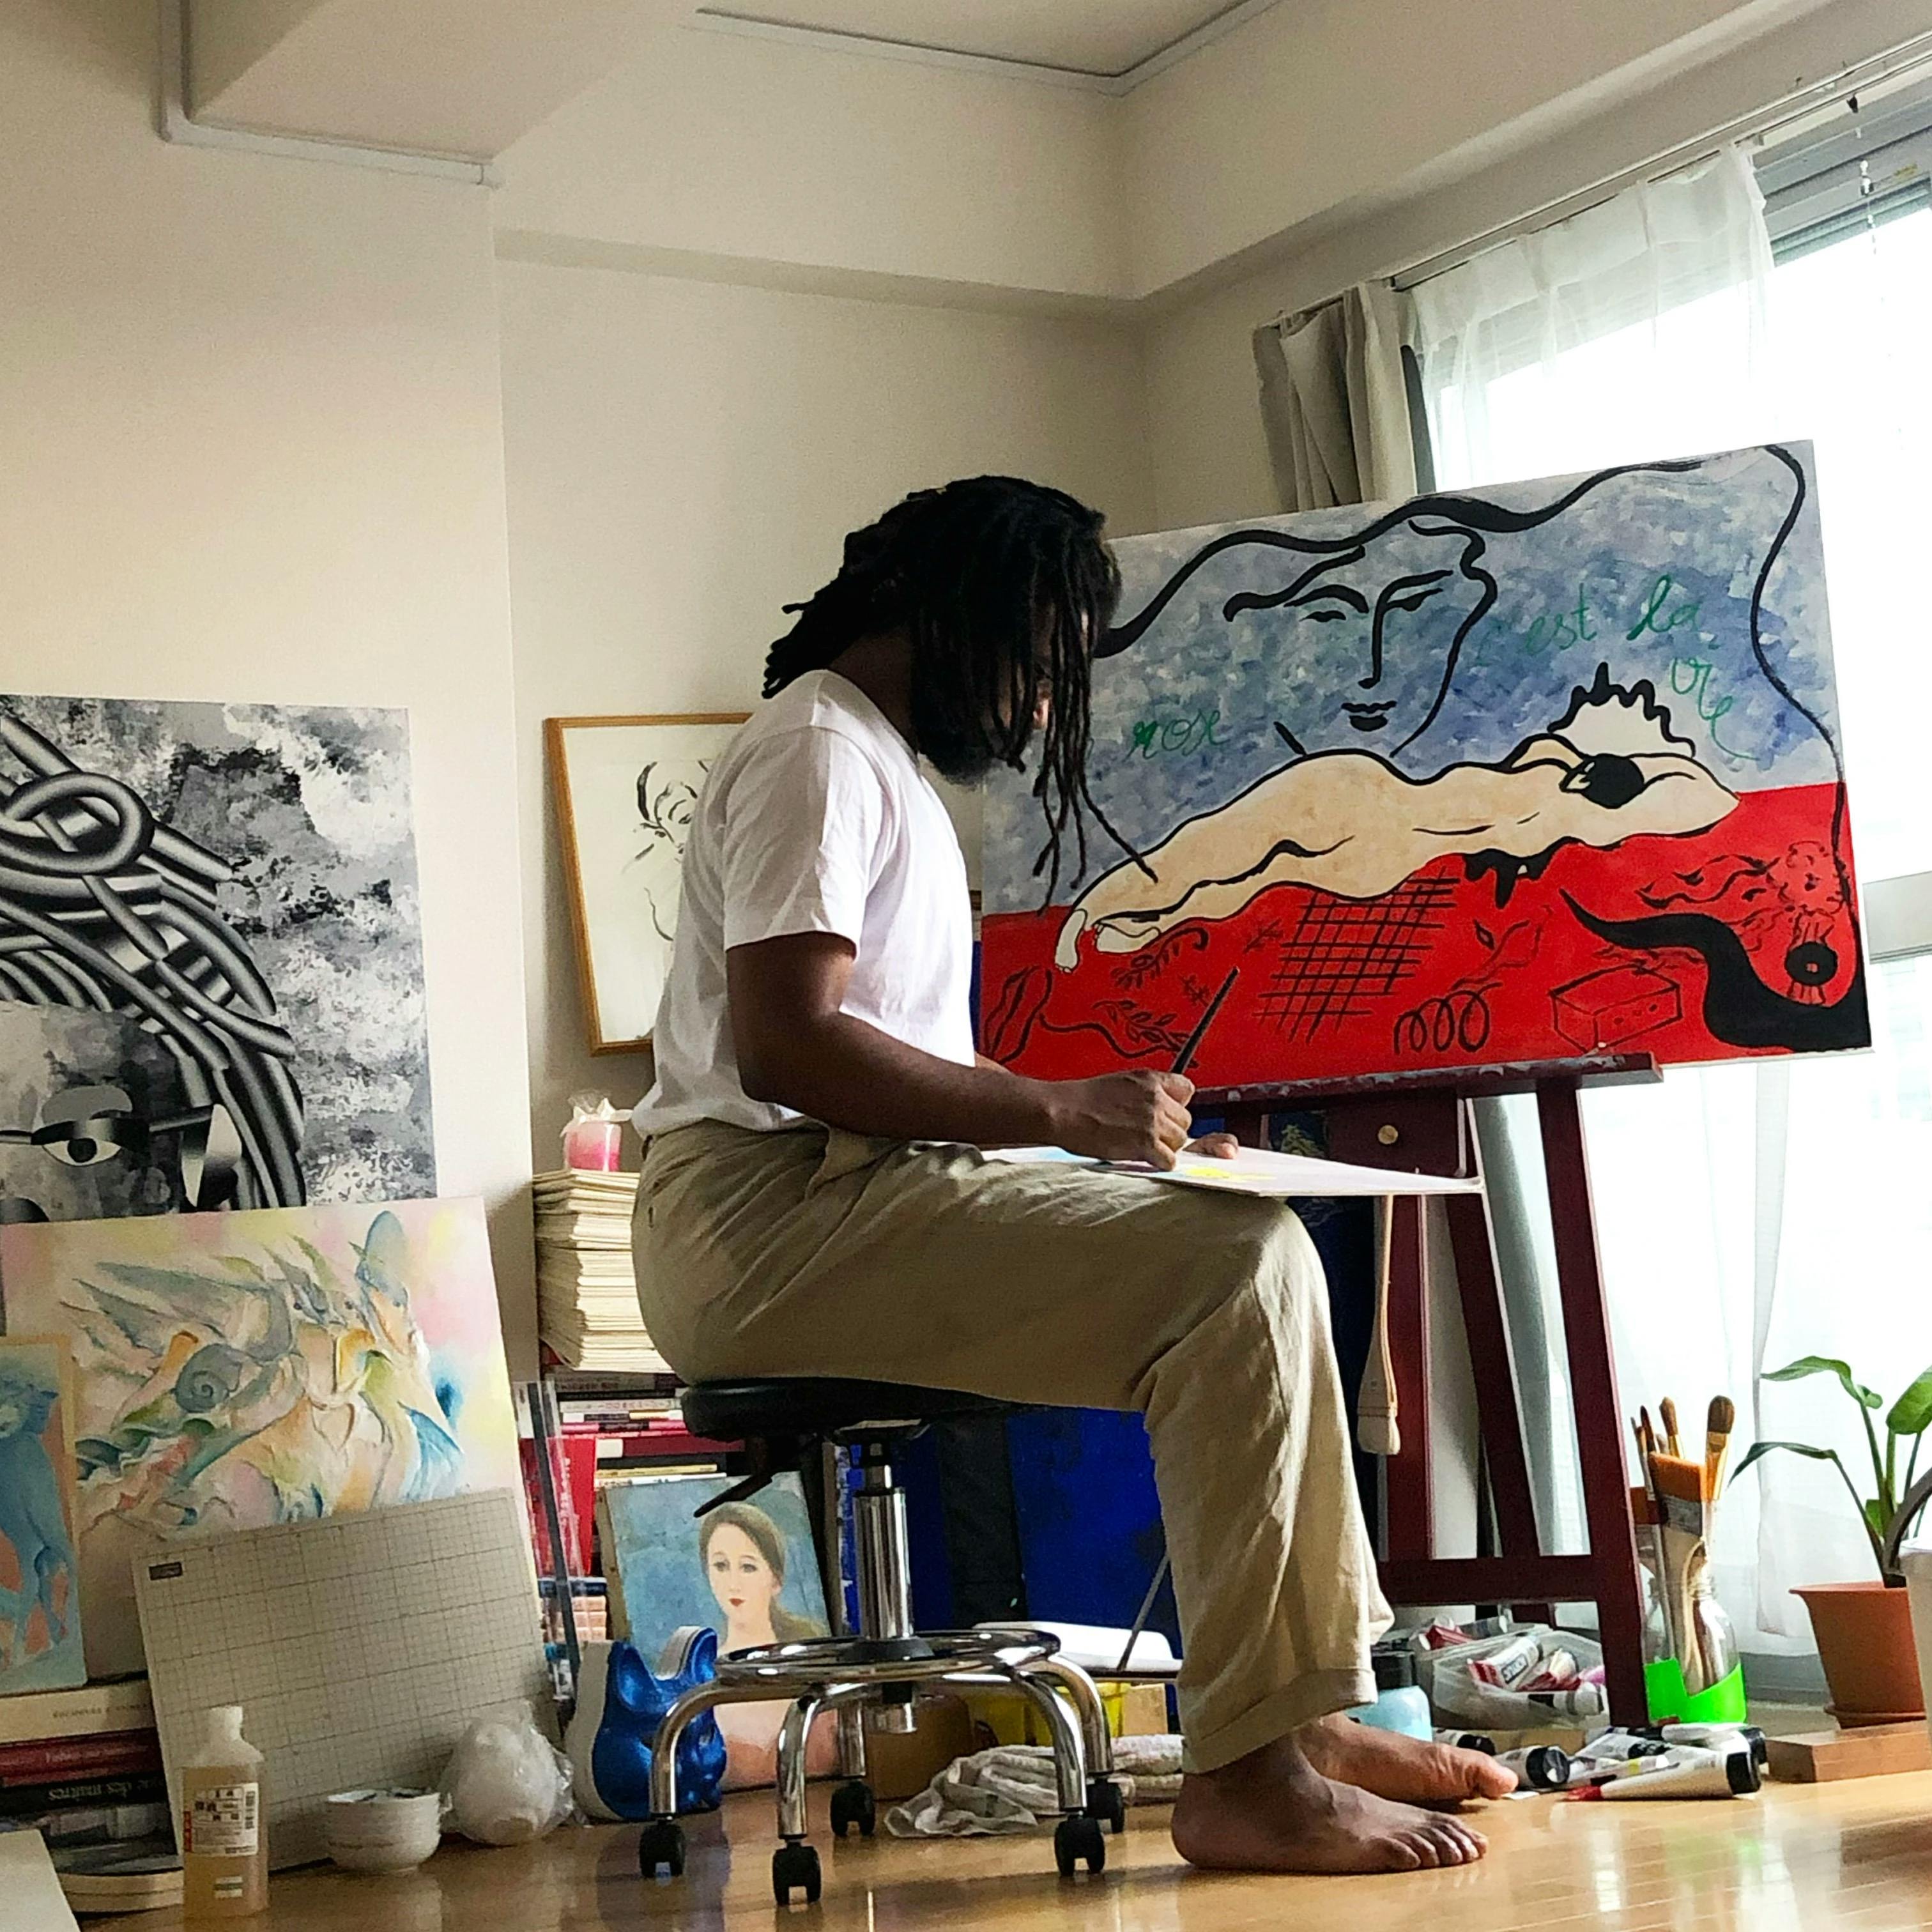 In Conversation with Ba Ousmane - Inside the Studio